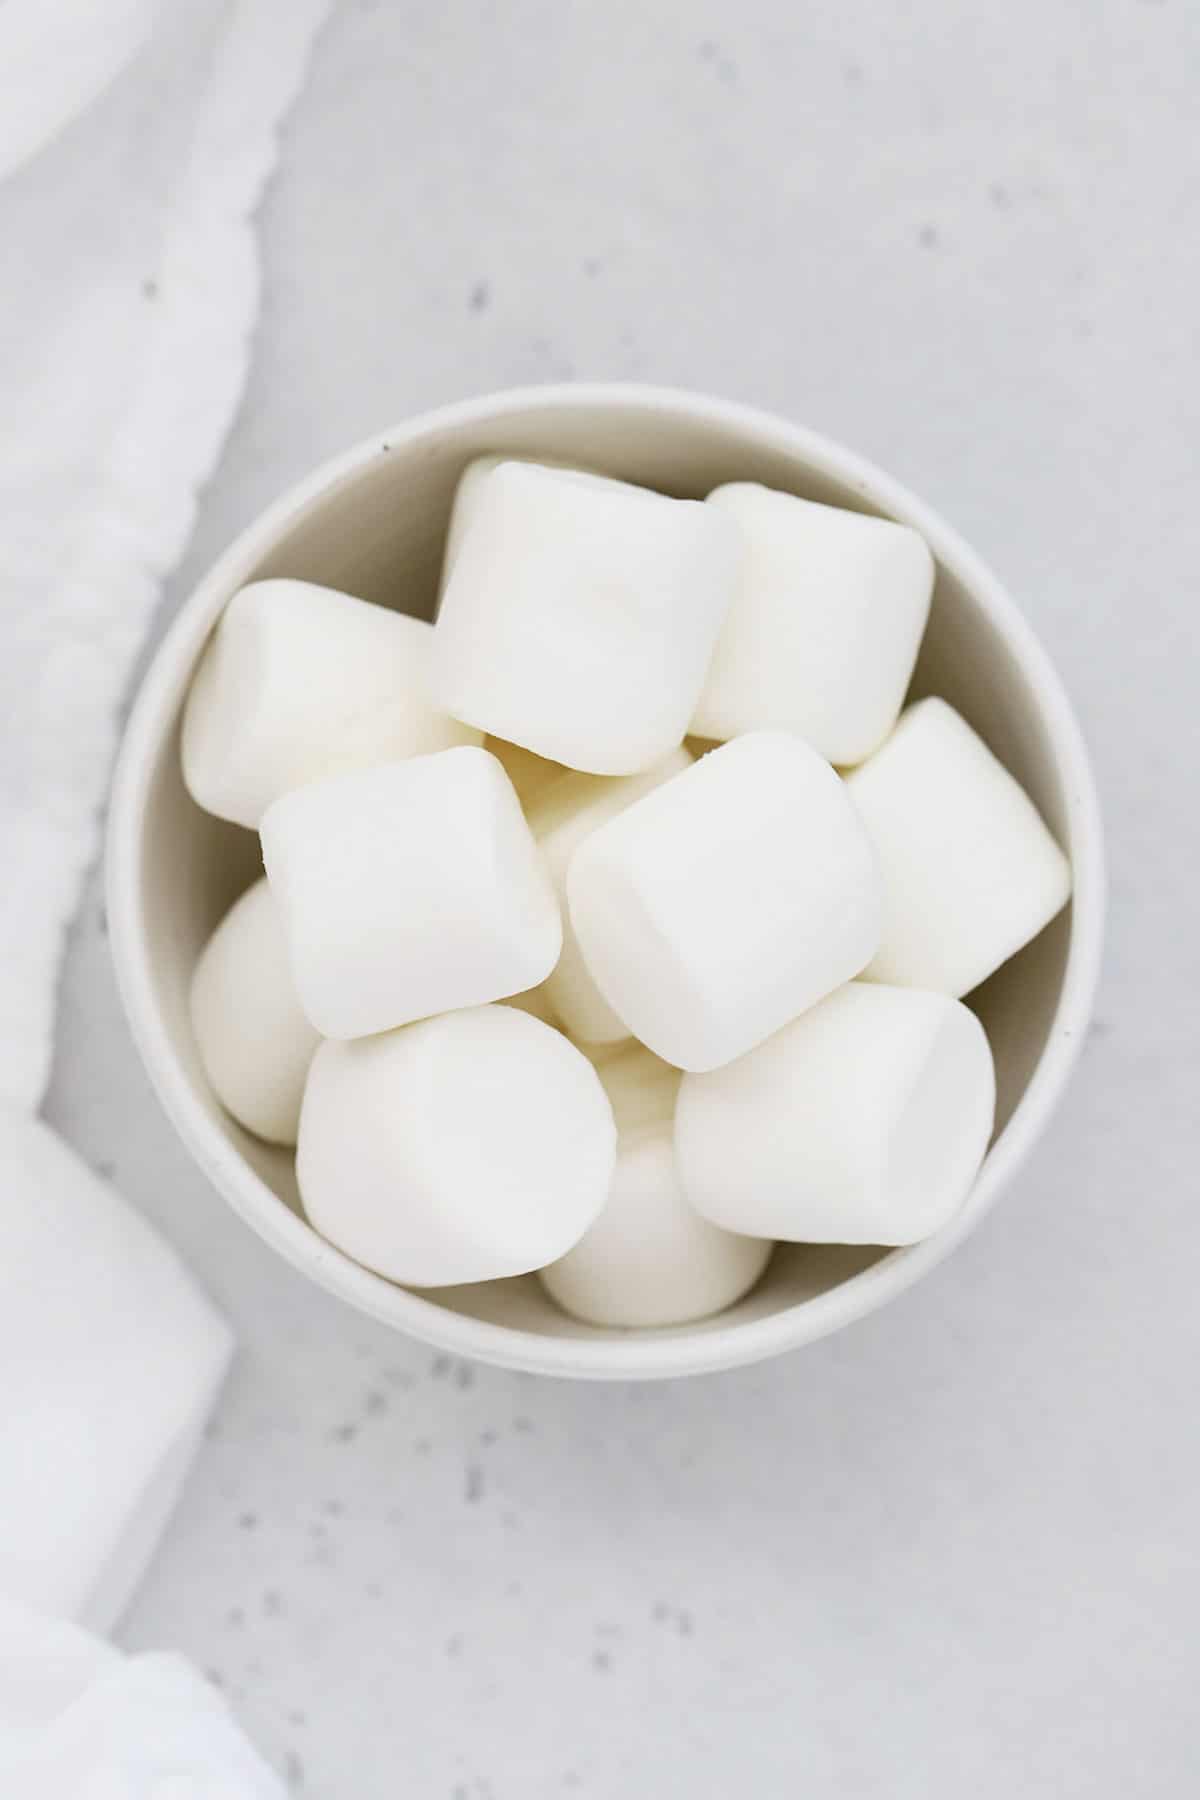 Overhead view of a bowl of gluten-free marshmallows